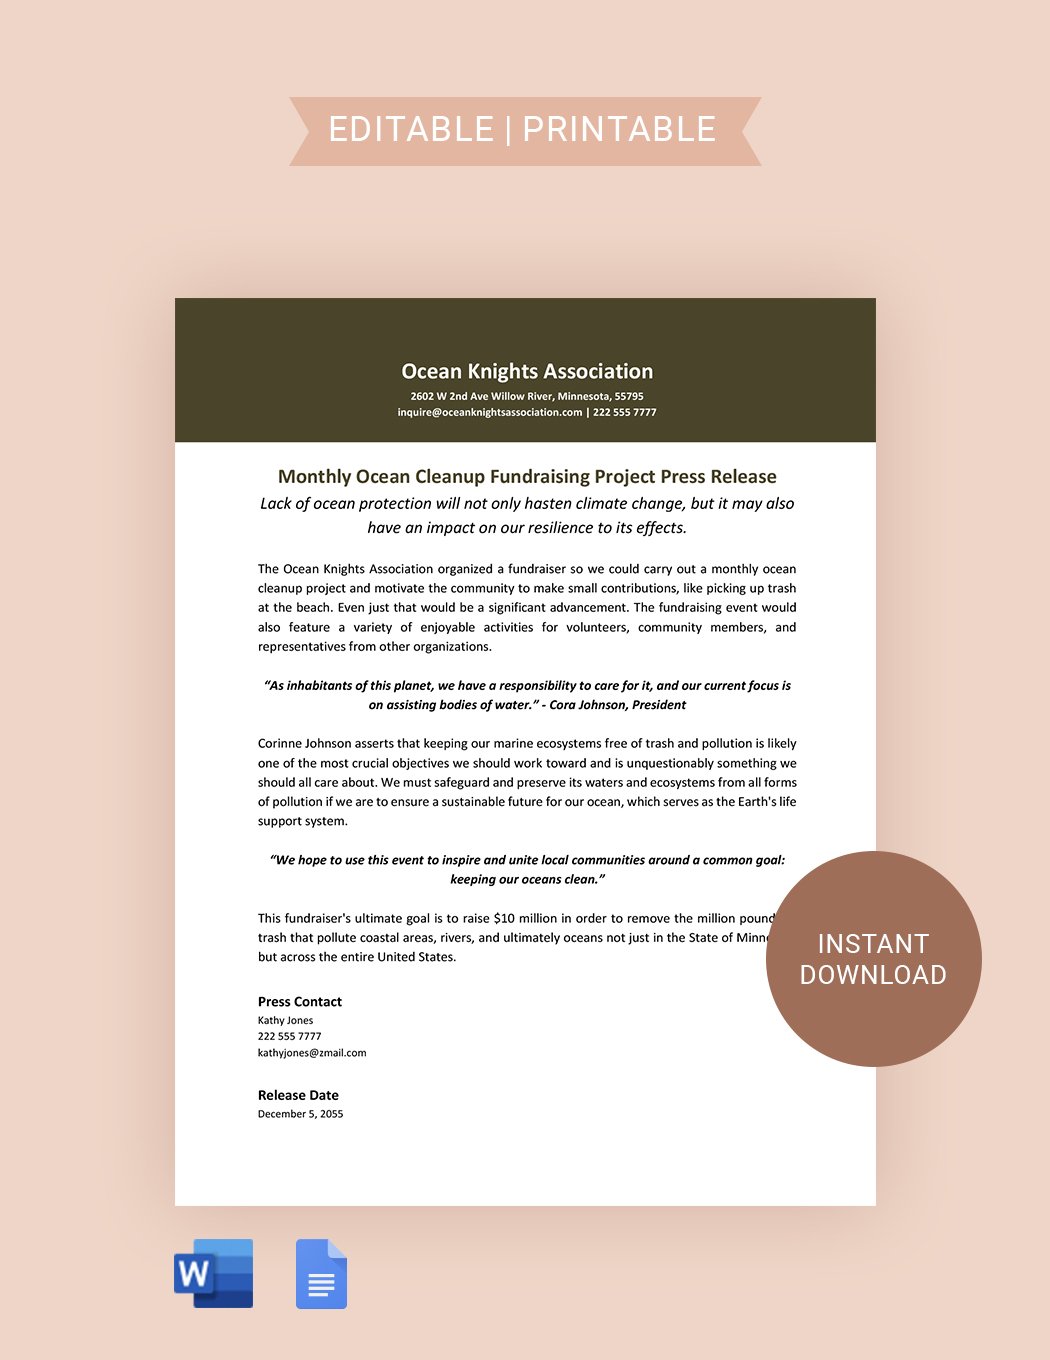 Fundraising Press Release Template